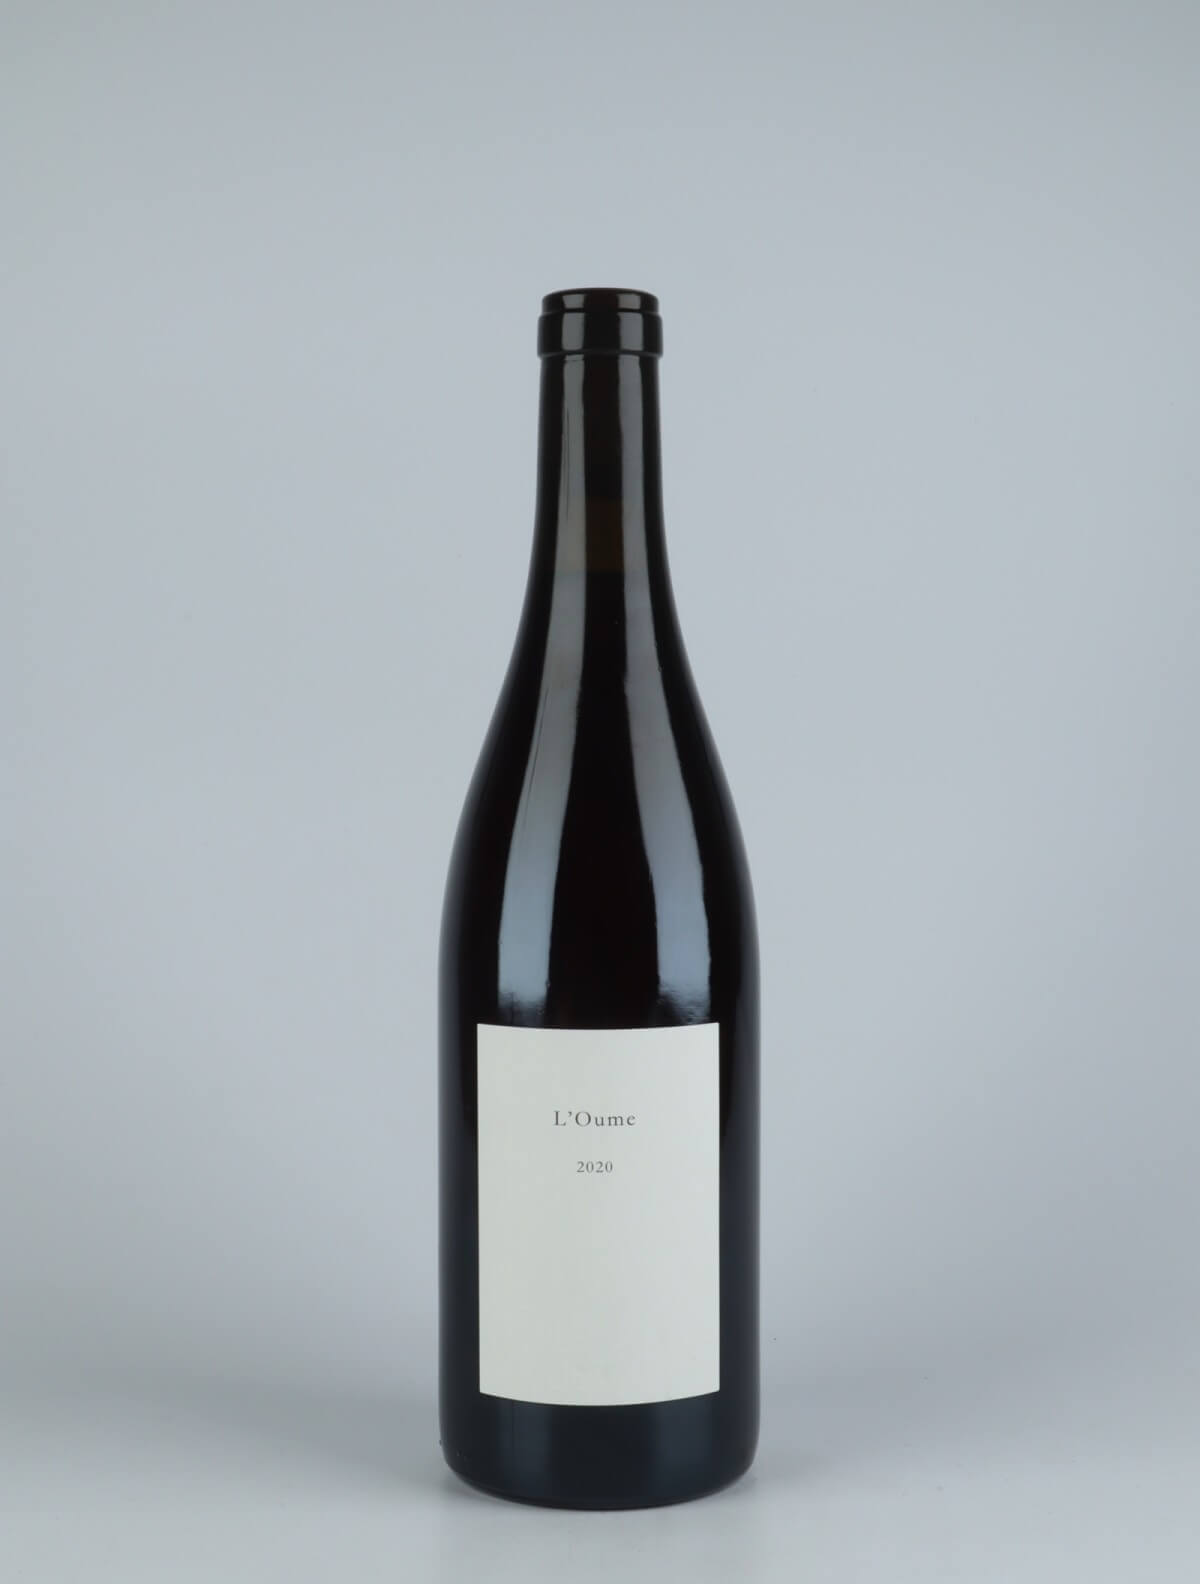 A bottle 2020 L'Oume Red wine from Les Frères Soulier, Rhône in France